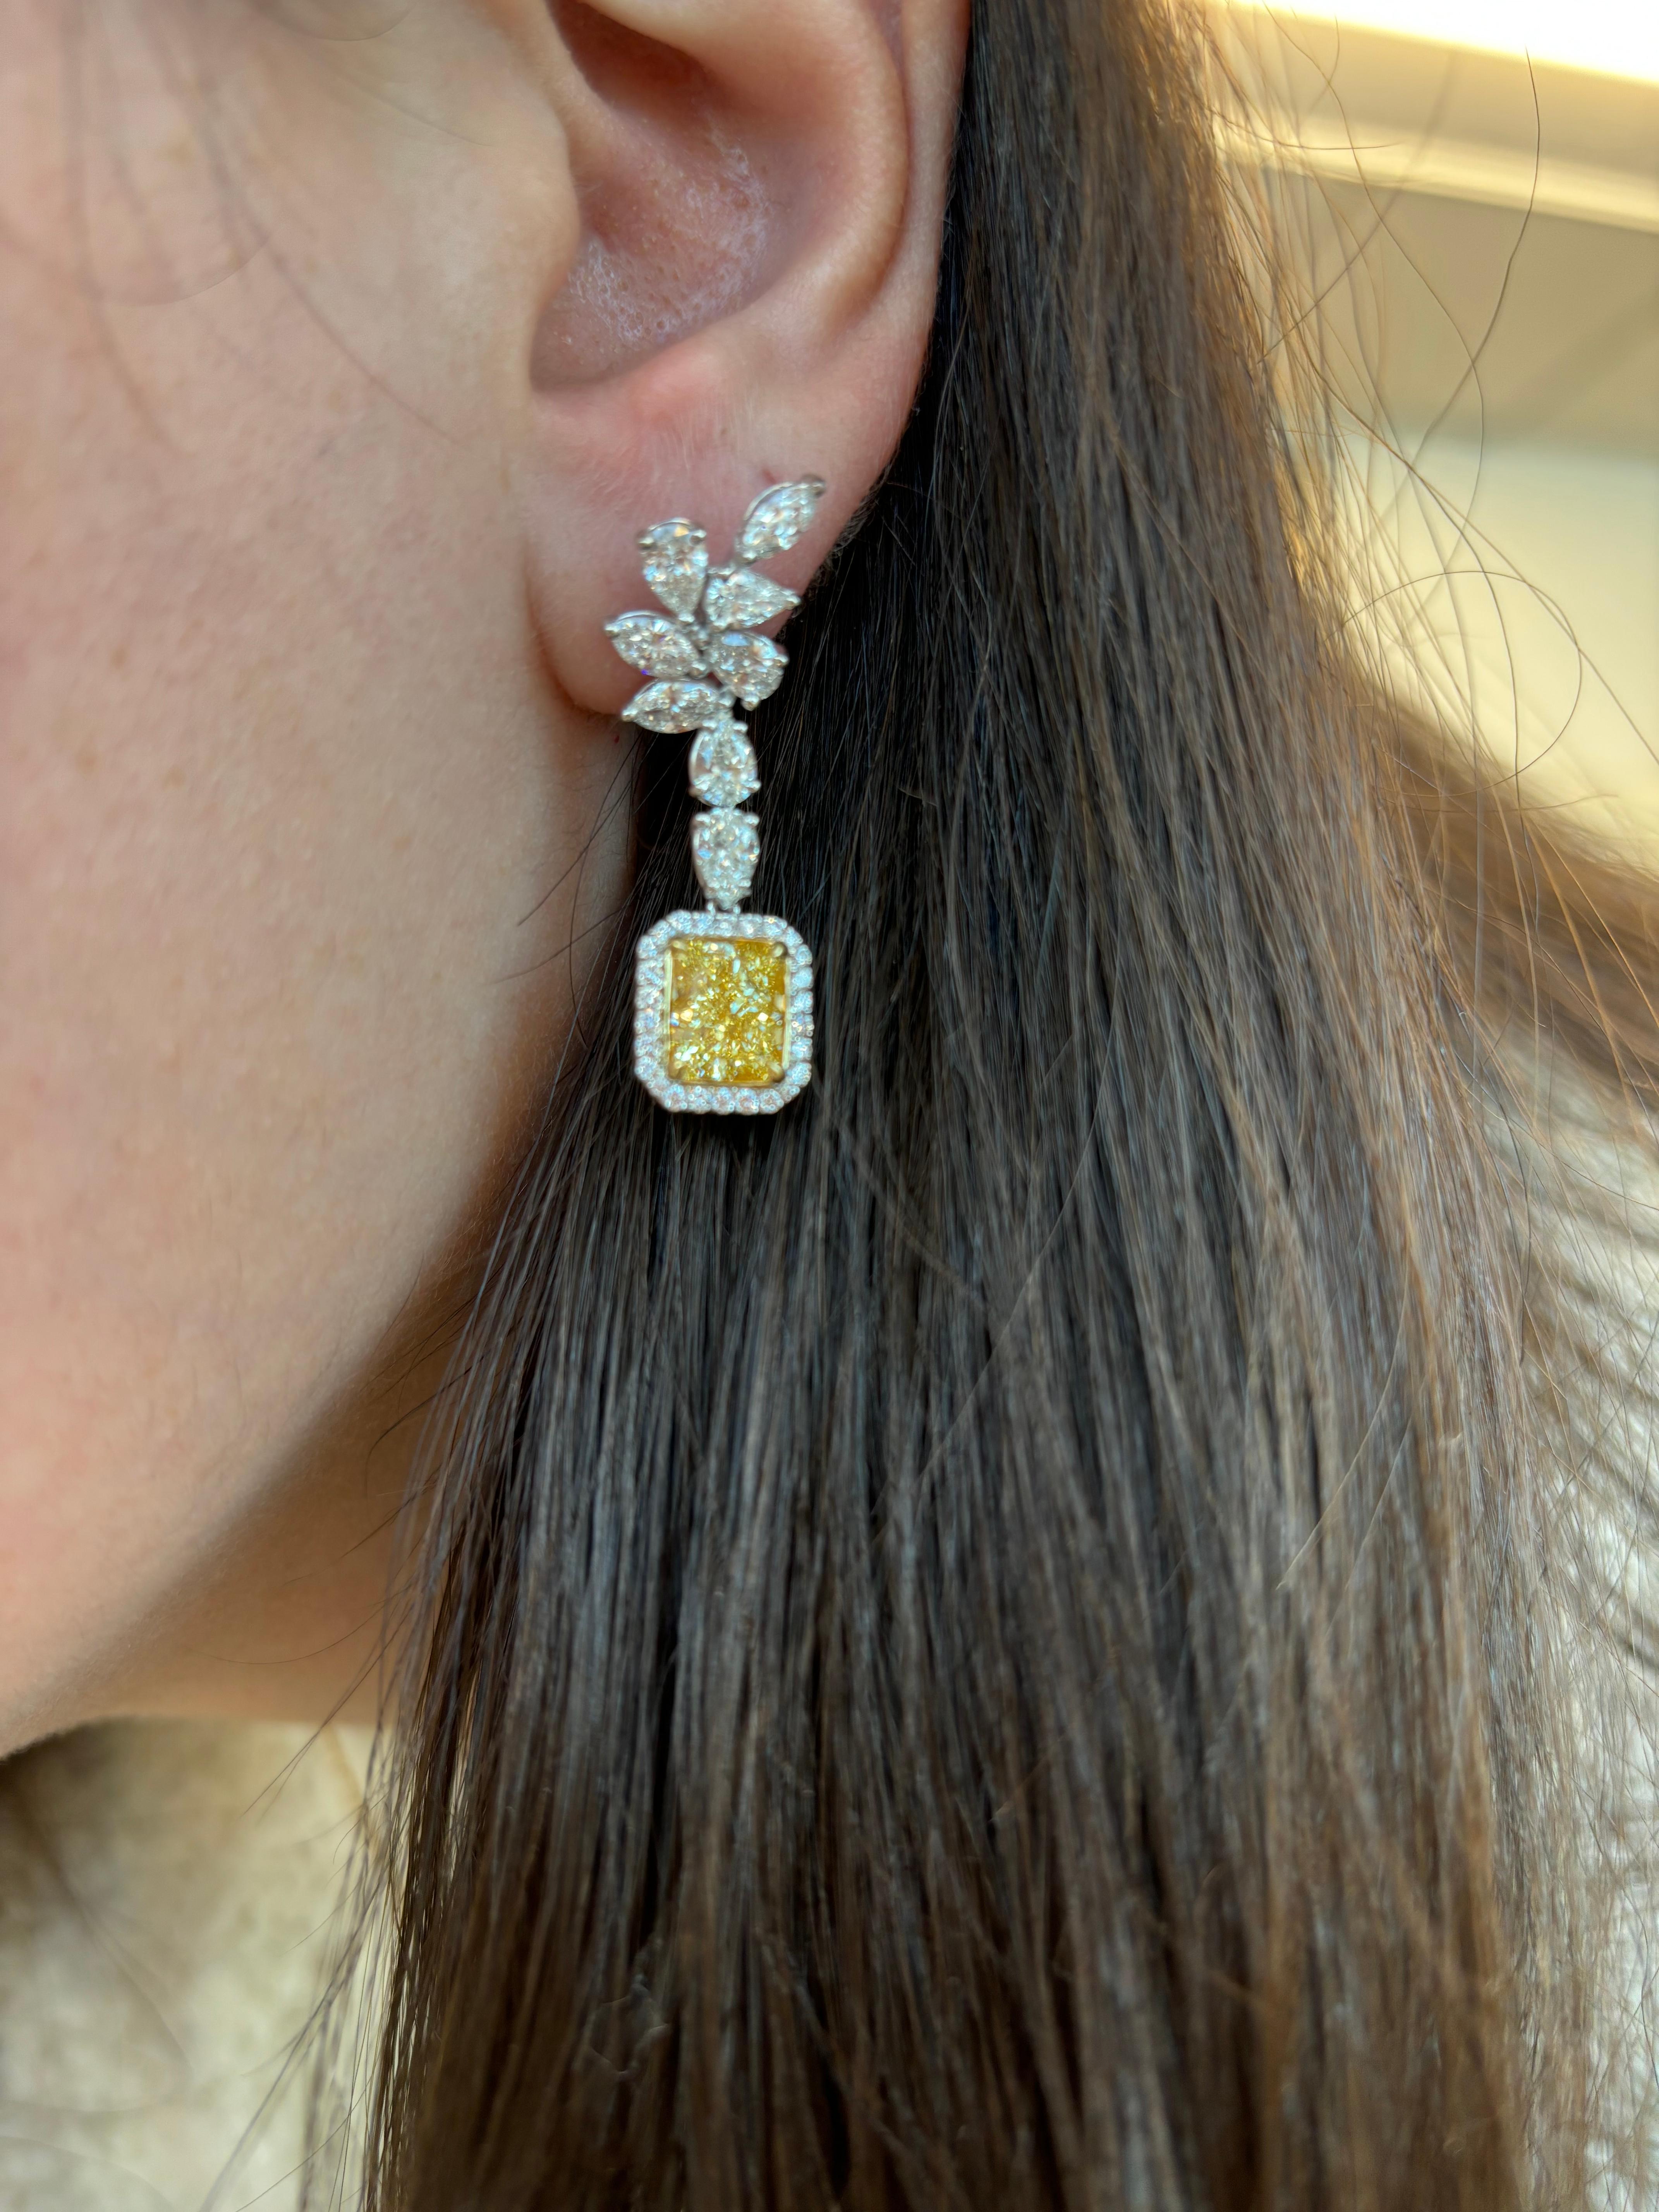 Stunning fancy yellow diamonds (that look fancy intense) with halo earrings, GIA certified. High jewelry by Alexander Beverly Hills. 
*Center stones look Fancy Intense Yellow in the mounting 
7.13 carats total diamond weight.
2 radiant cut diamonds,